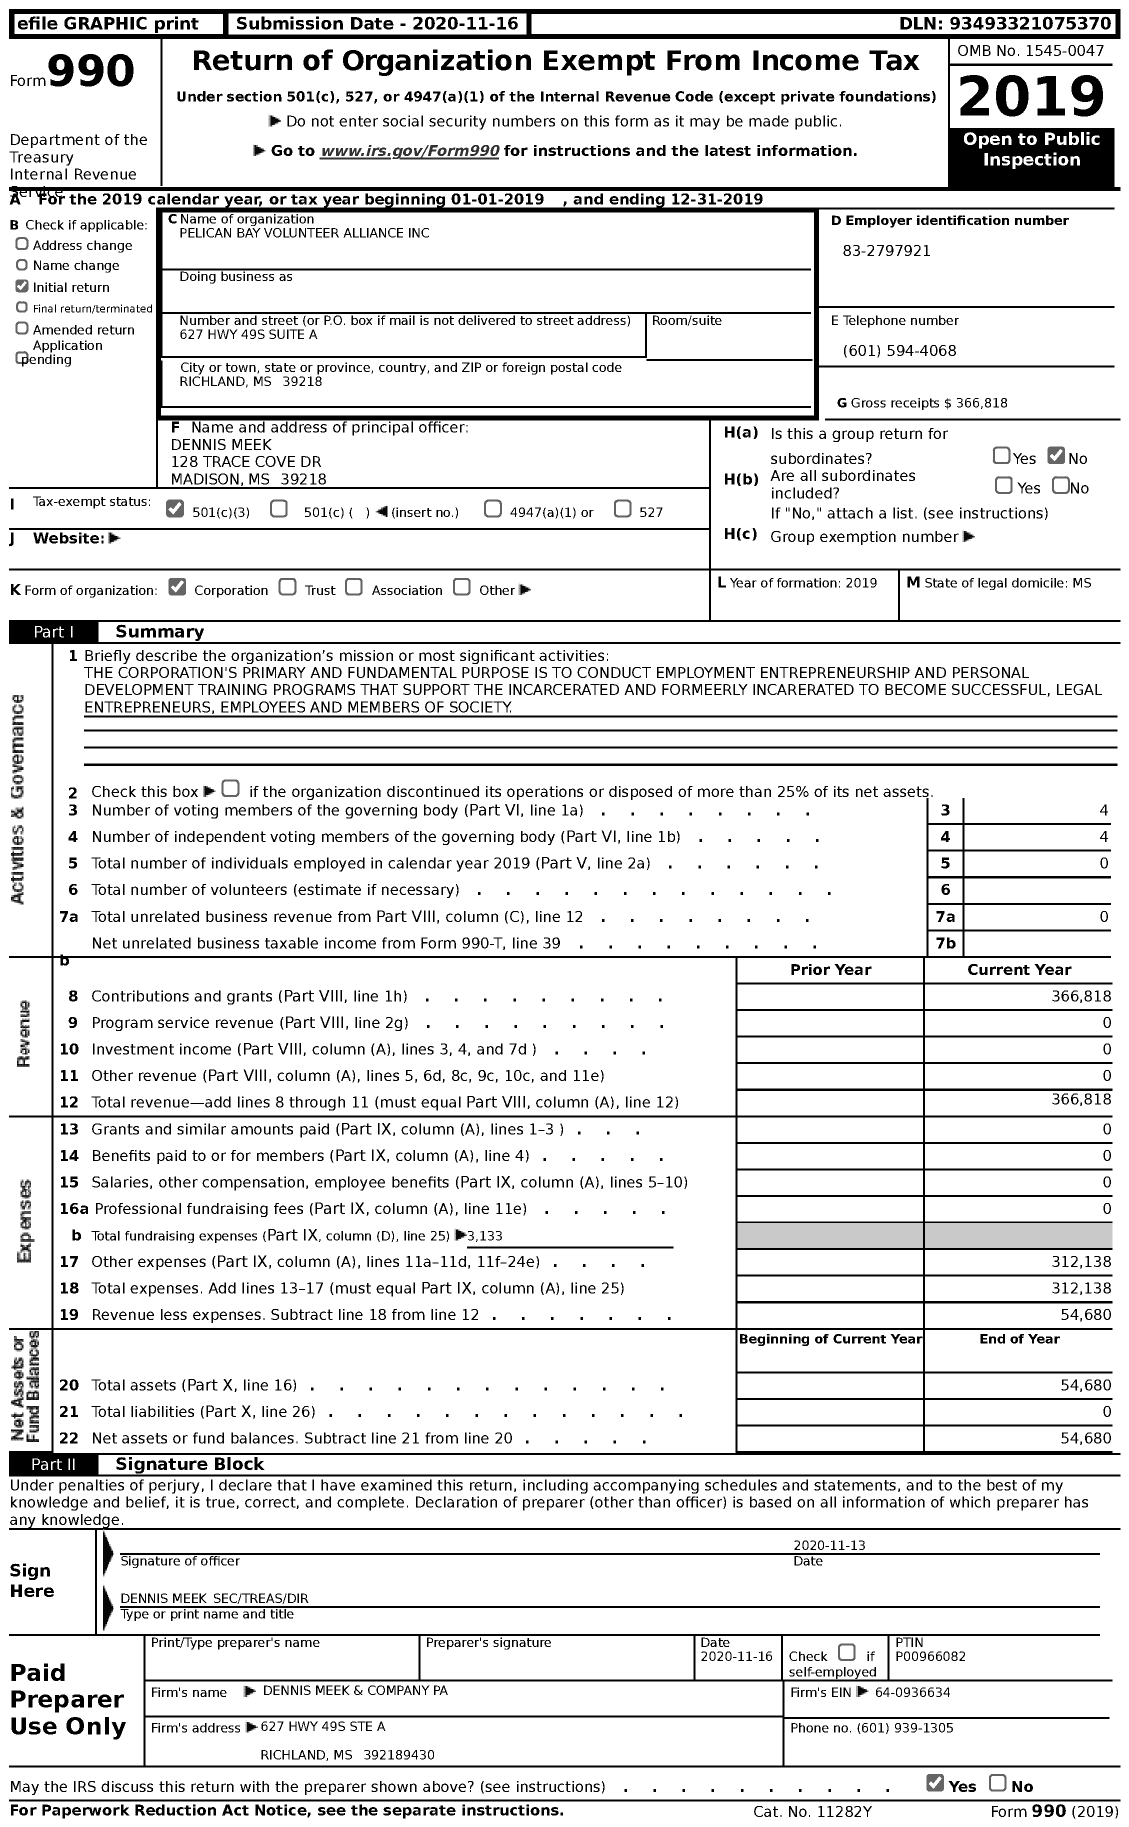 Image of first page of 2019 Form 990 for Pelican Bay Volunteer Alliance